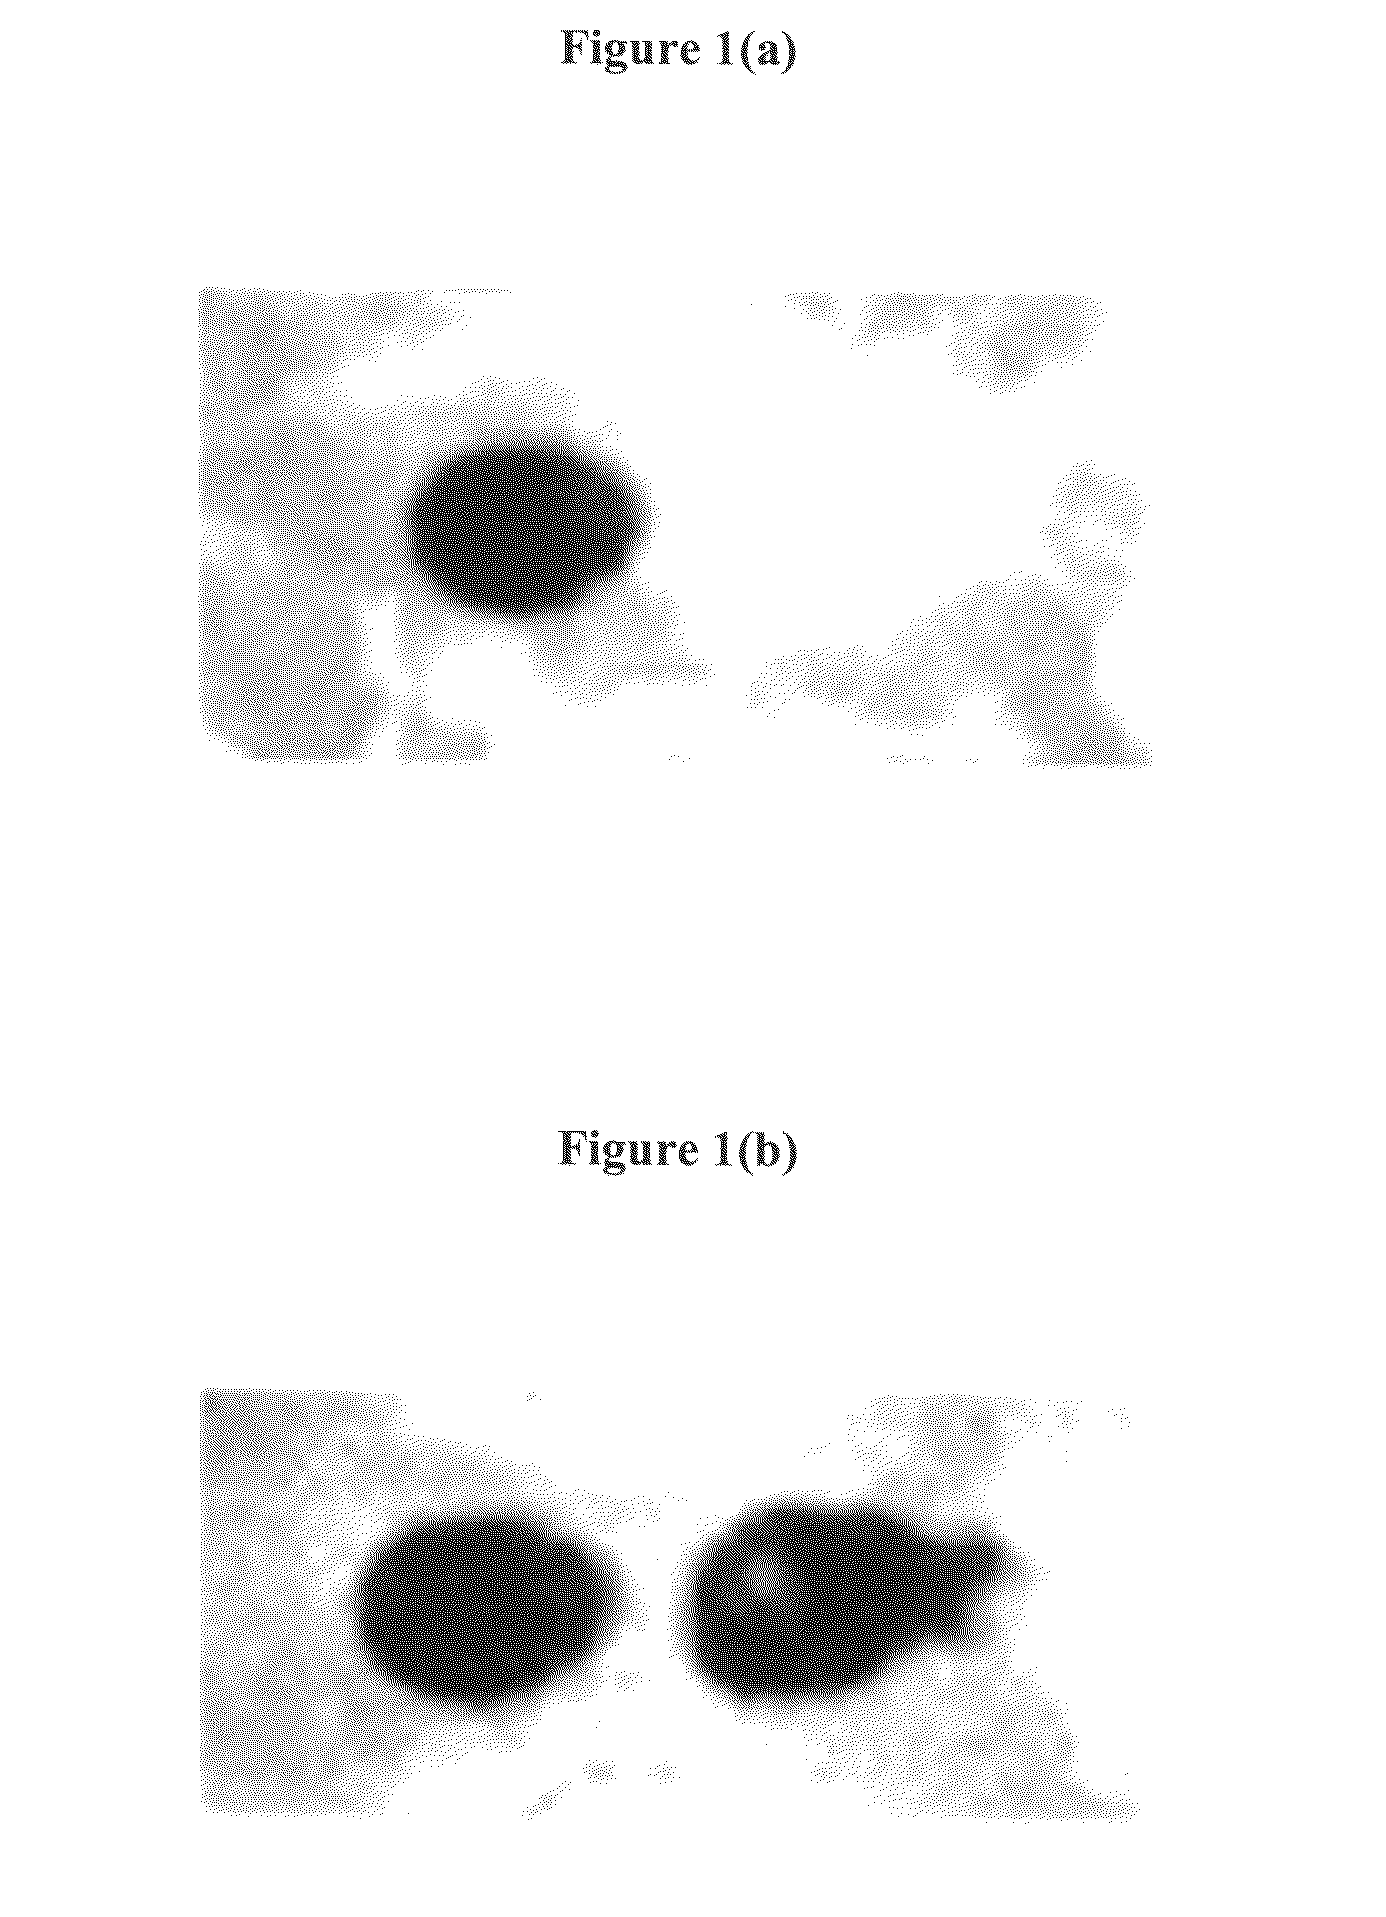 Reusable substrate for DNA microarray production